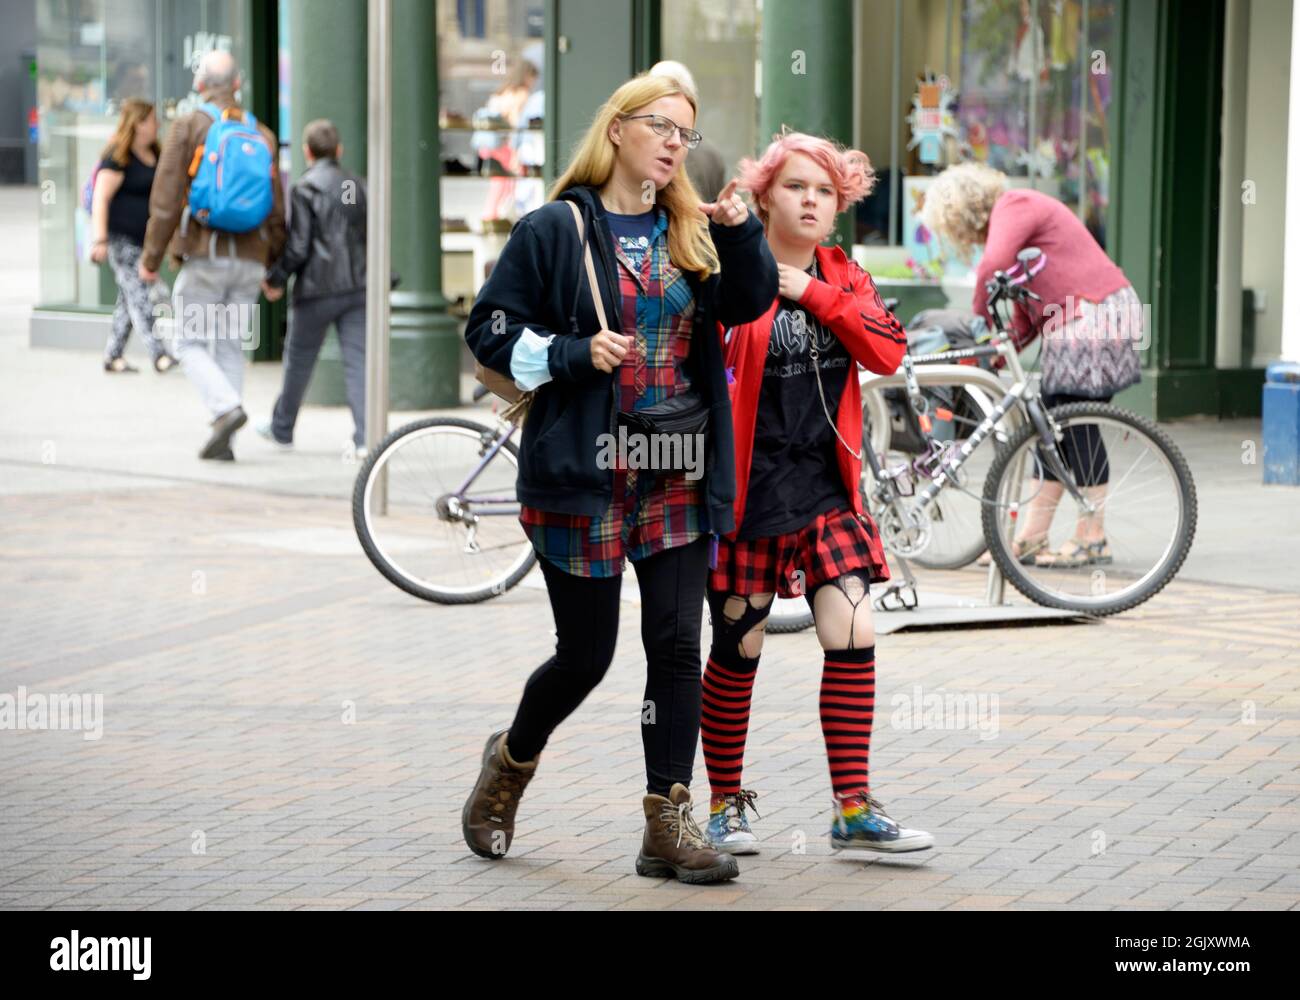 Mother & daughter, out shopping. Unusual fashion choices. Stock Photo